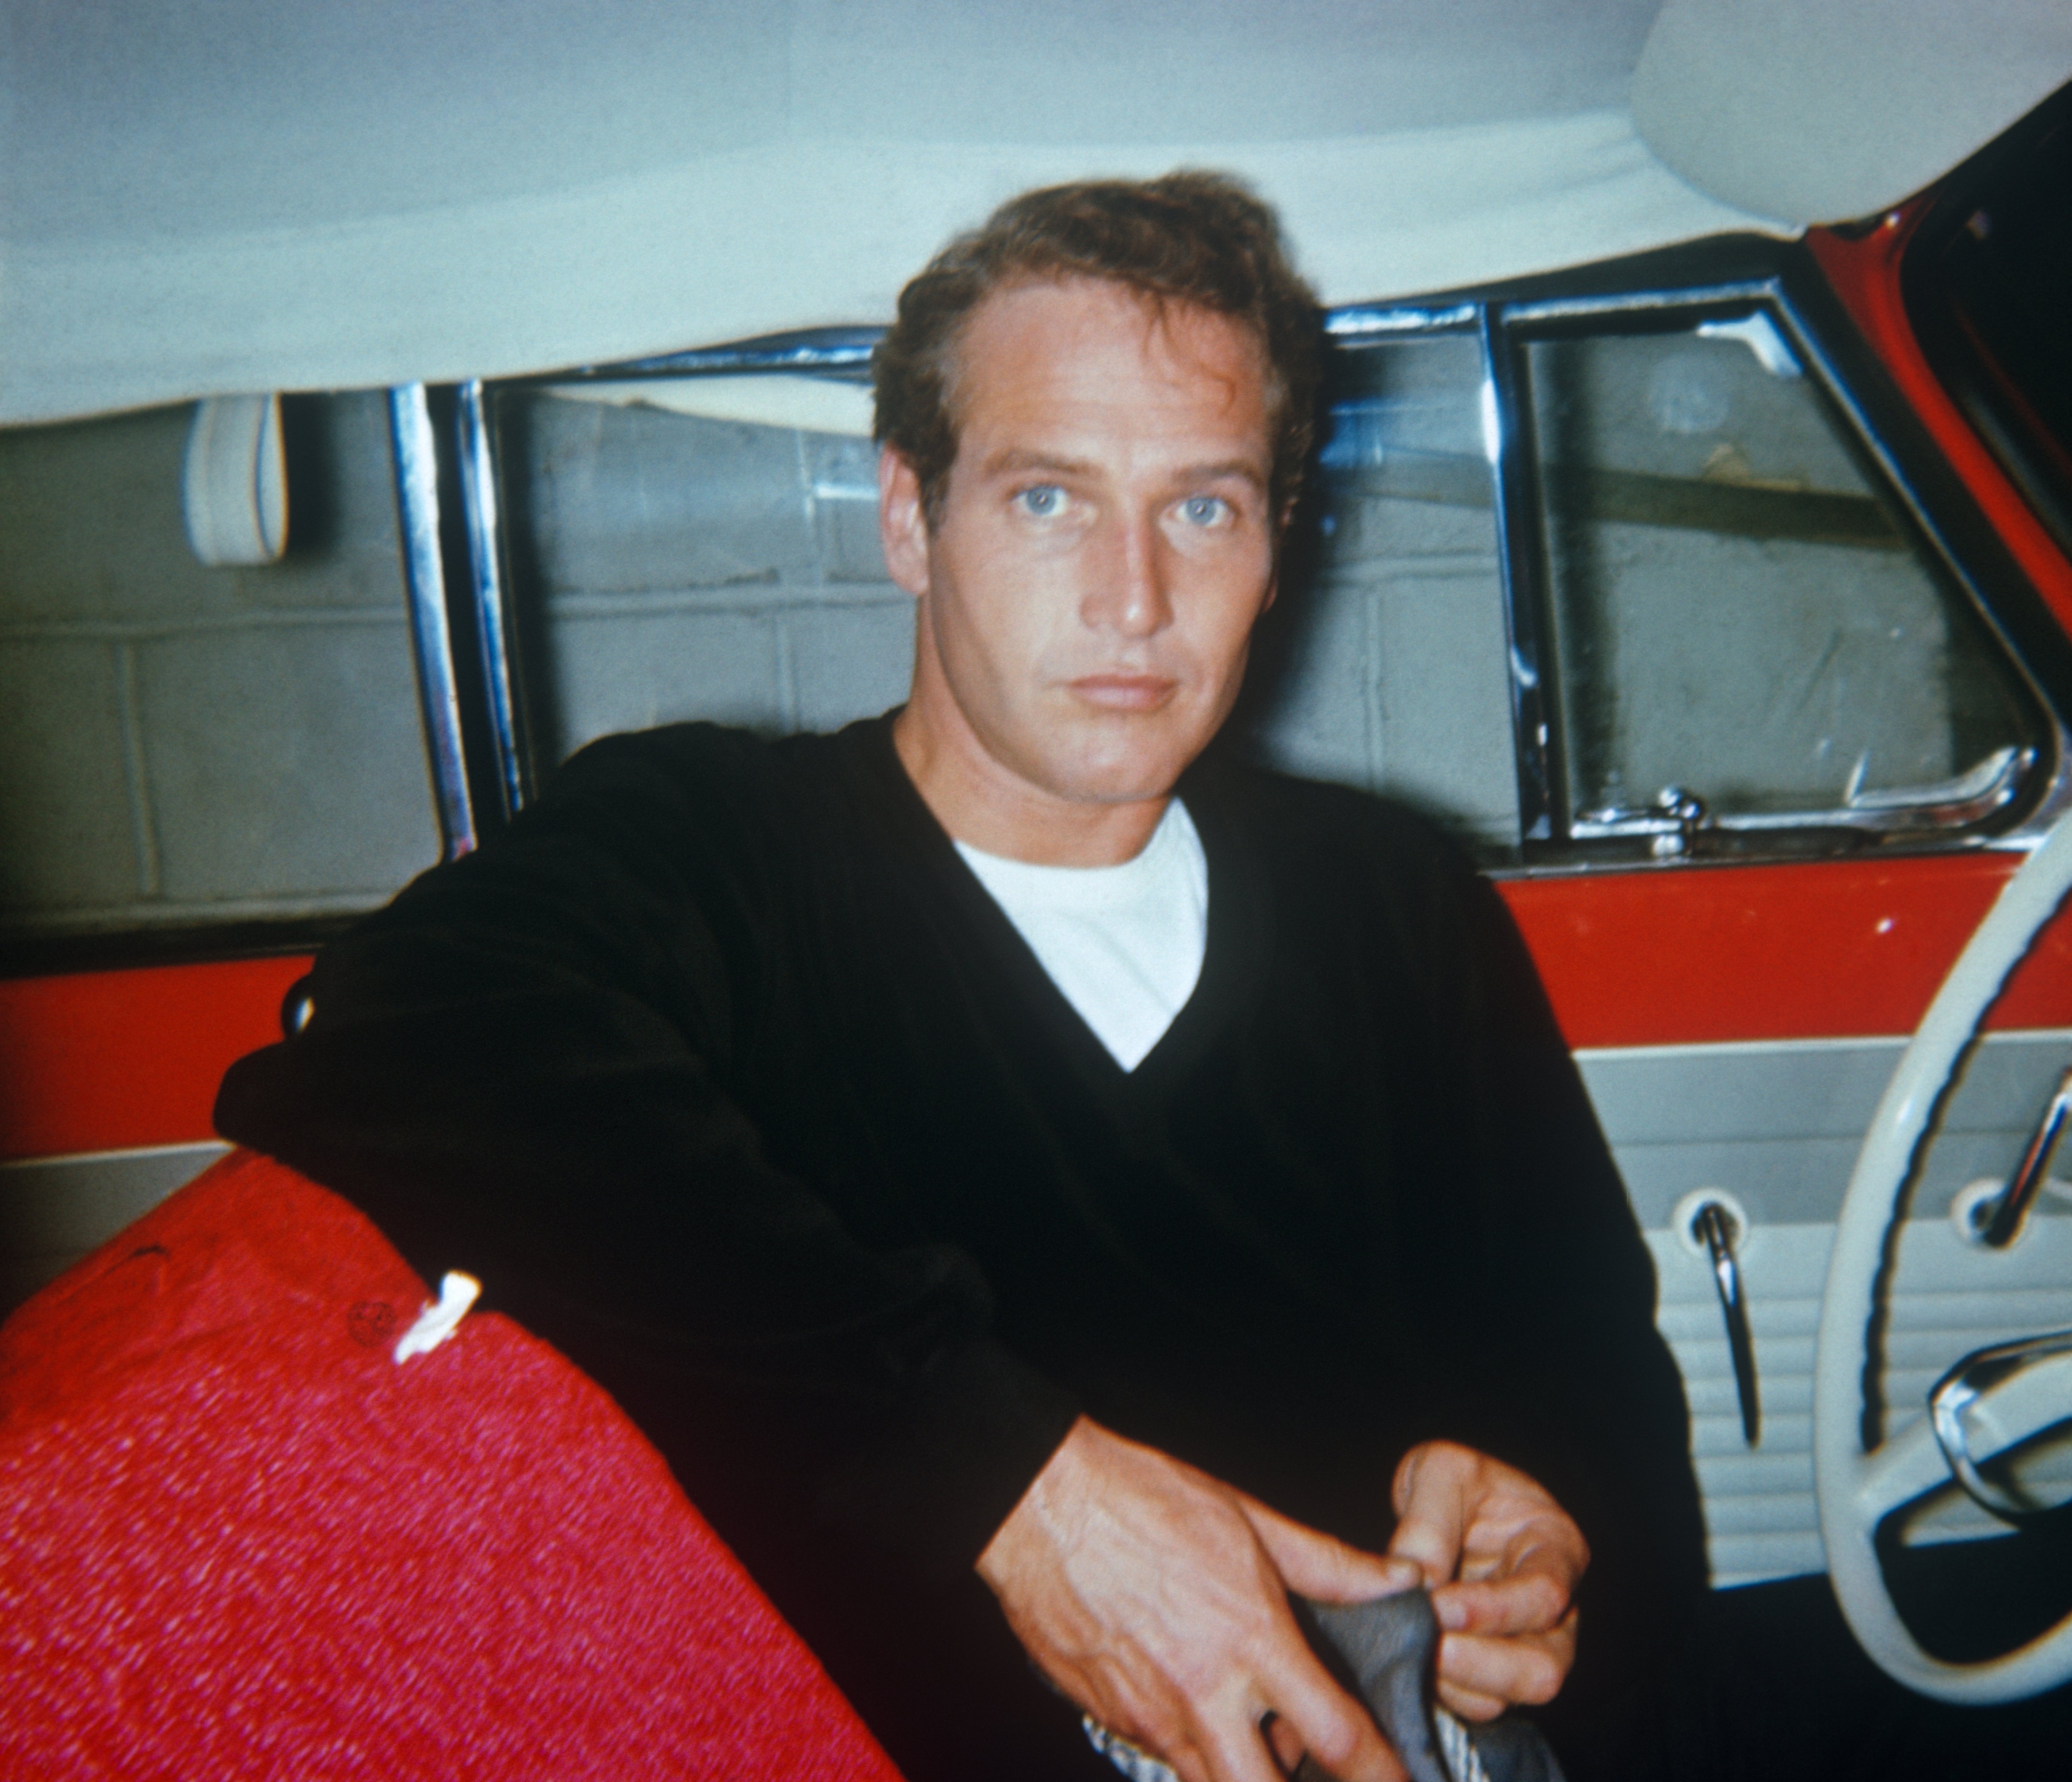 Paul Newman sitting in a red car with white interior, circa 1950. | Source: Getty Images